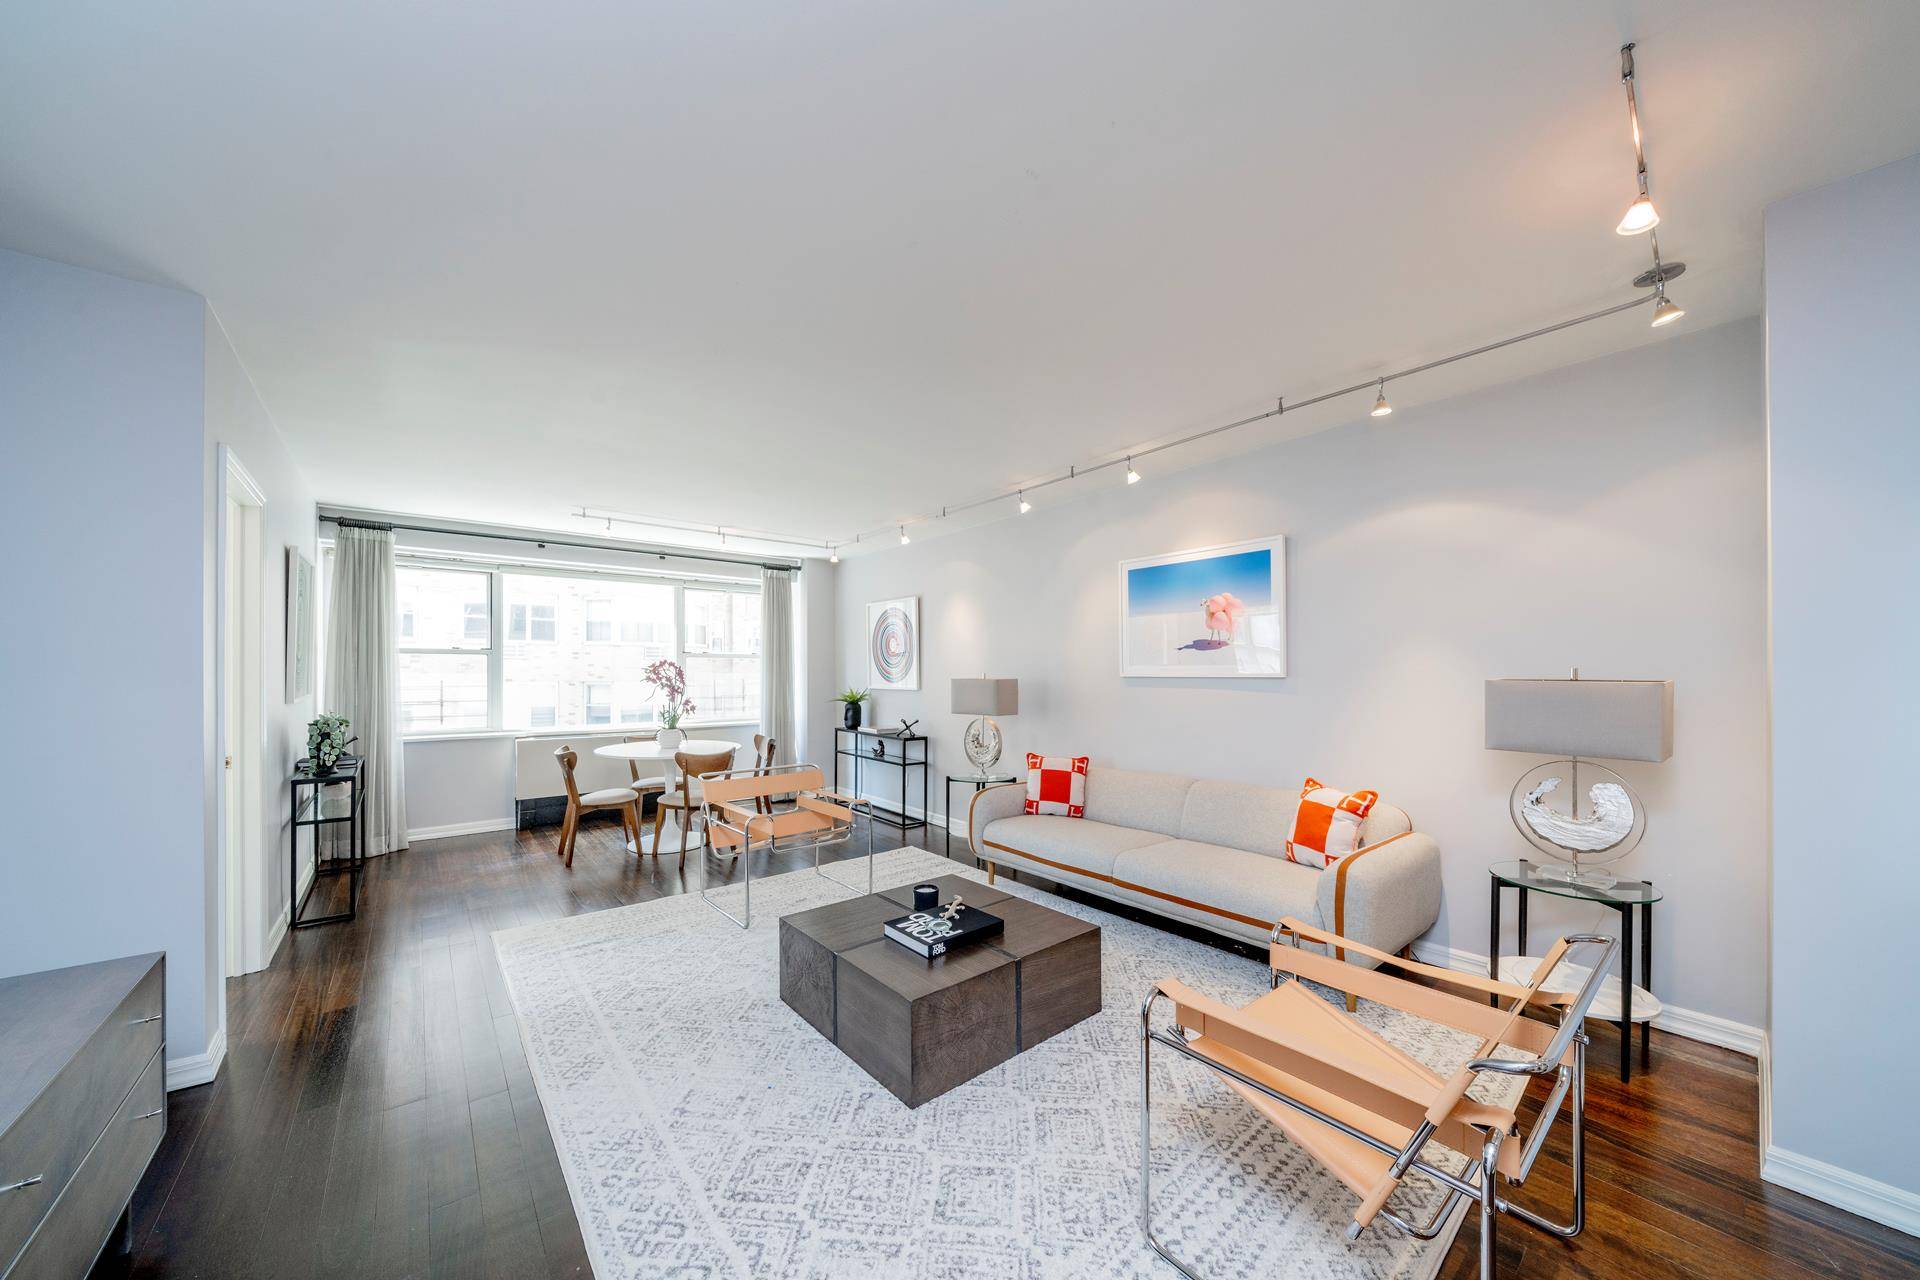 Apartment 5F is a renovated, south eastern facing, quiet 2 bedroom that has been converted to a 3 bedroom, 2 bathroom home in a prime Upper East Side.